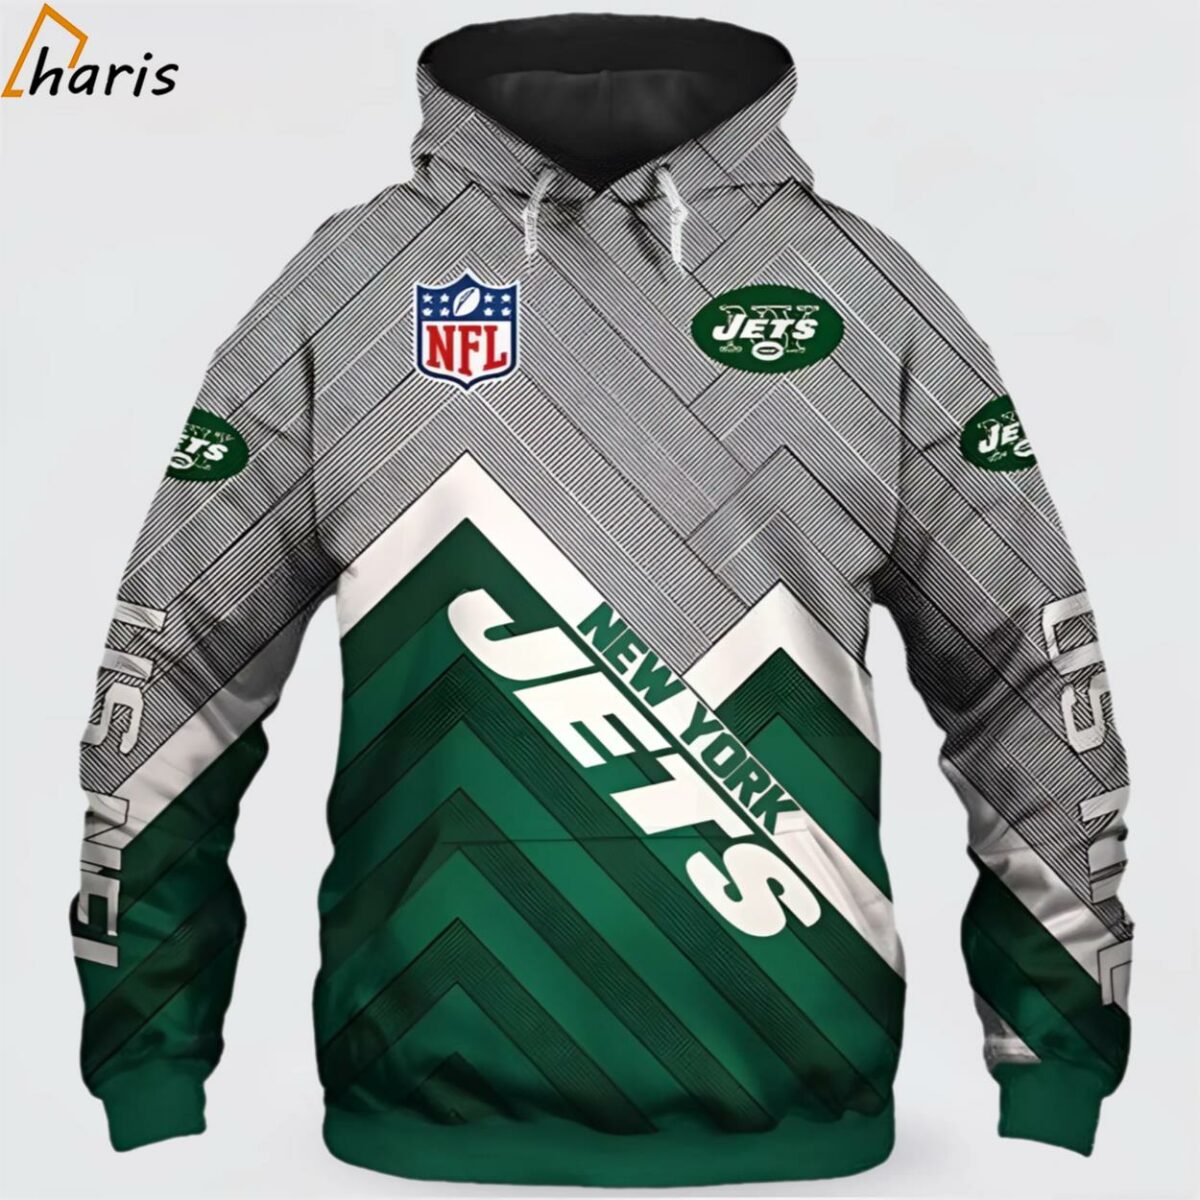 NFL New York Jets Elevate Your Game Day Look 3D Hoodie 1 jersey